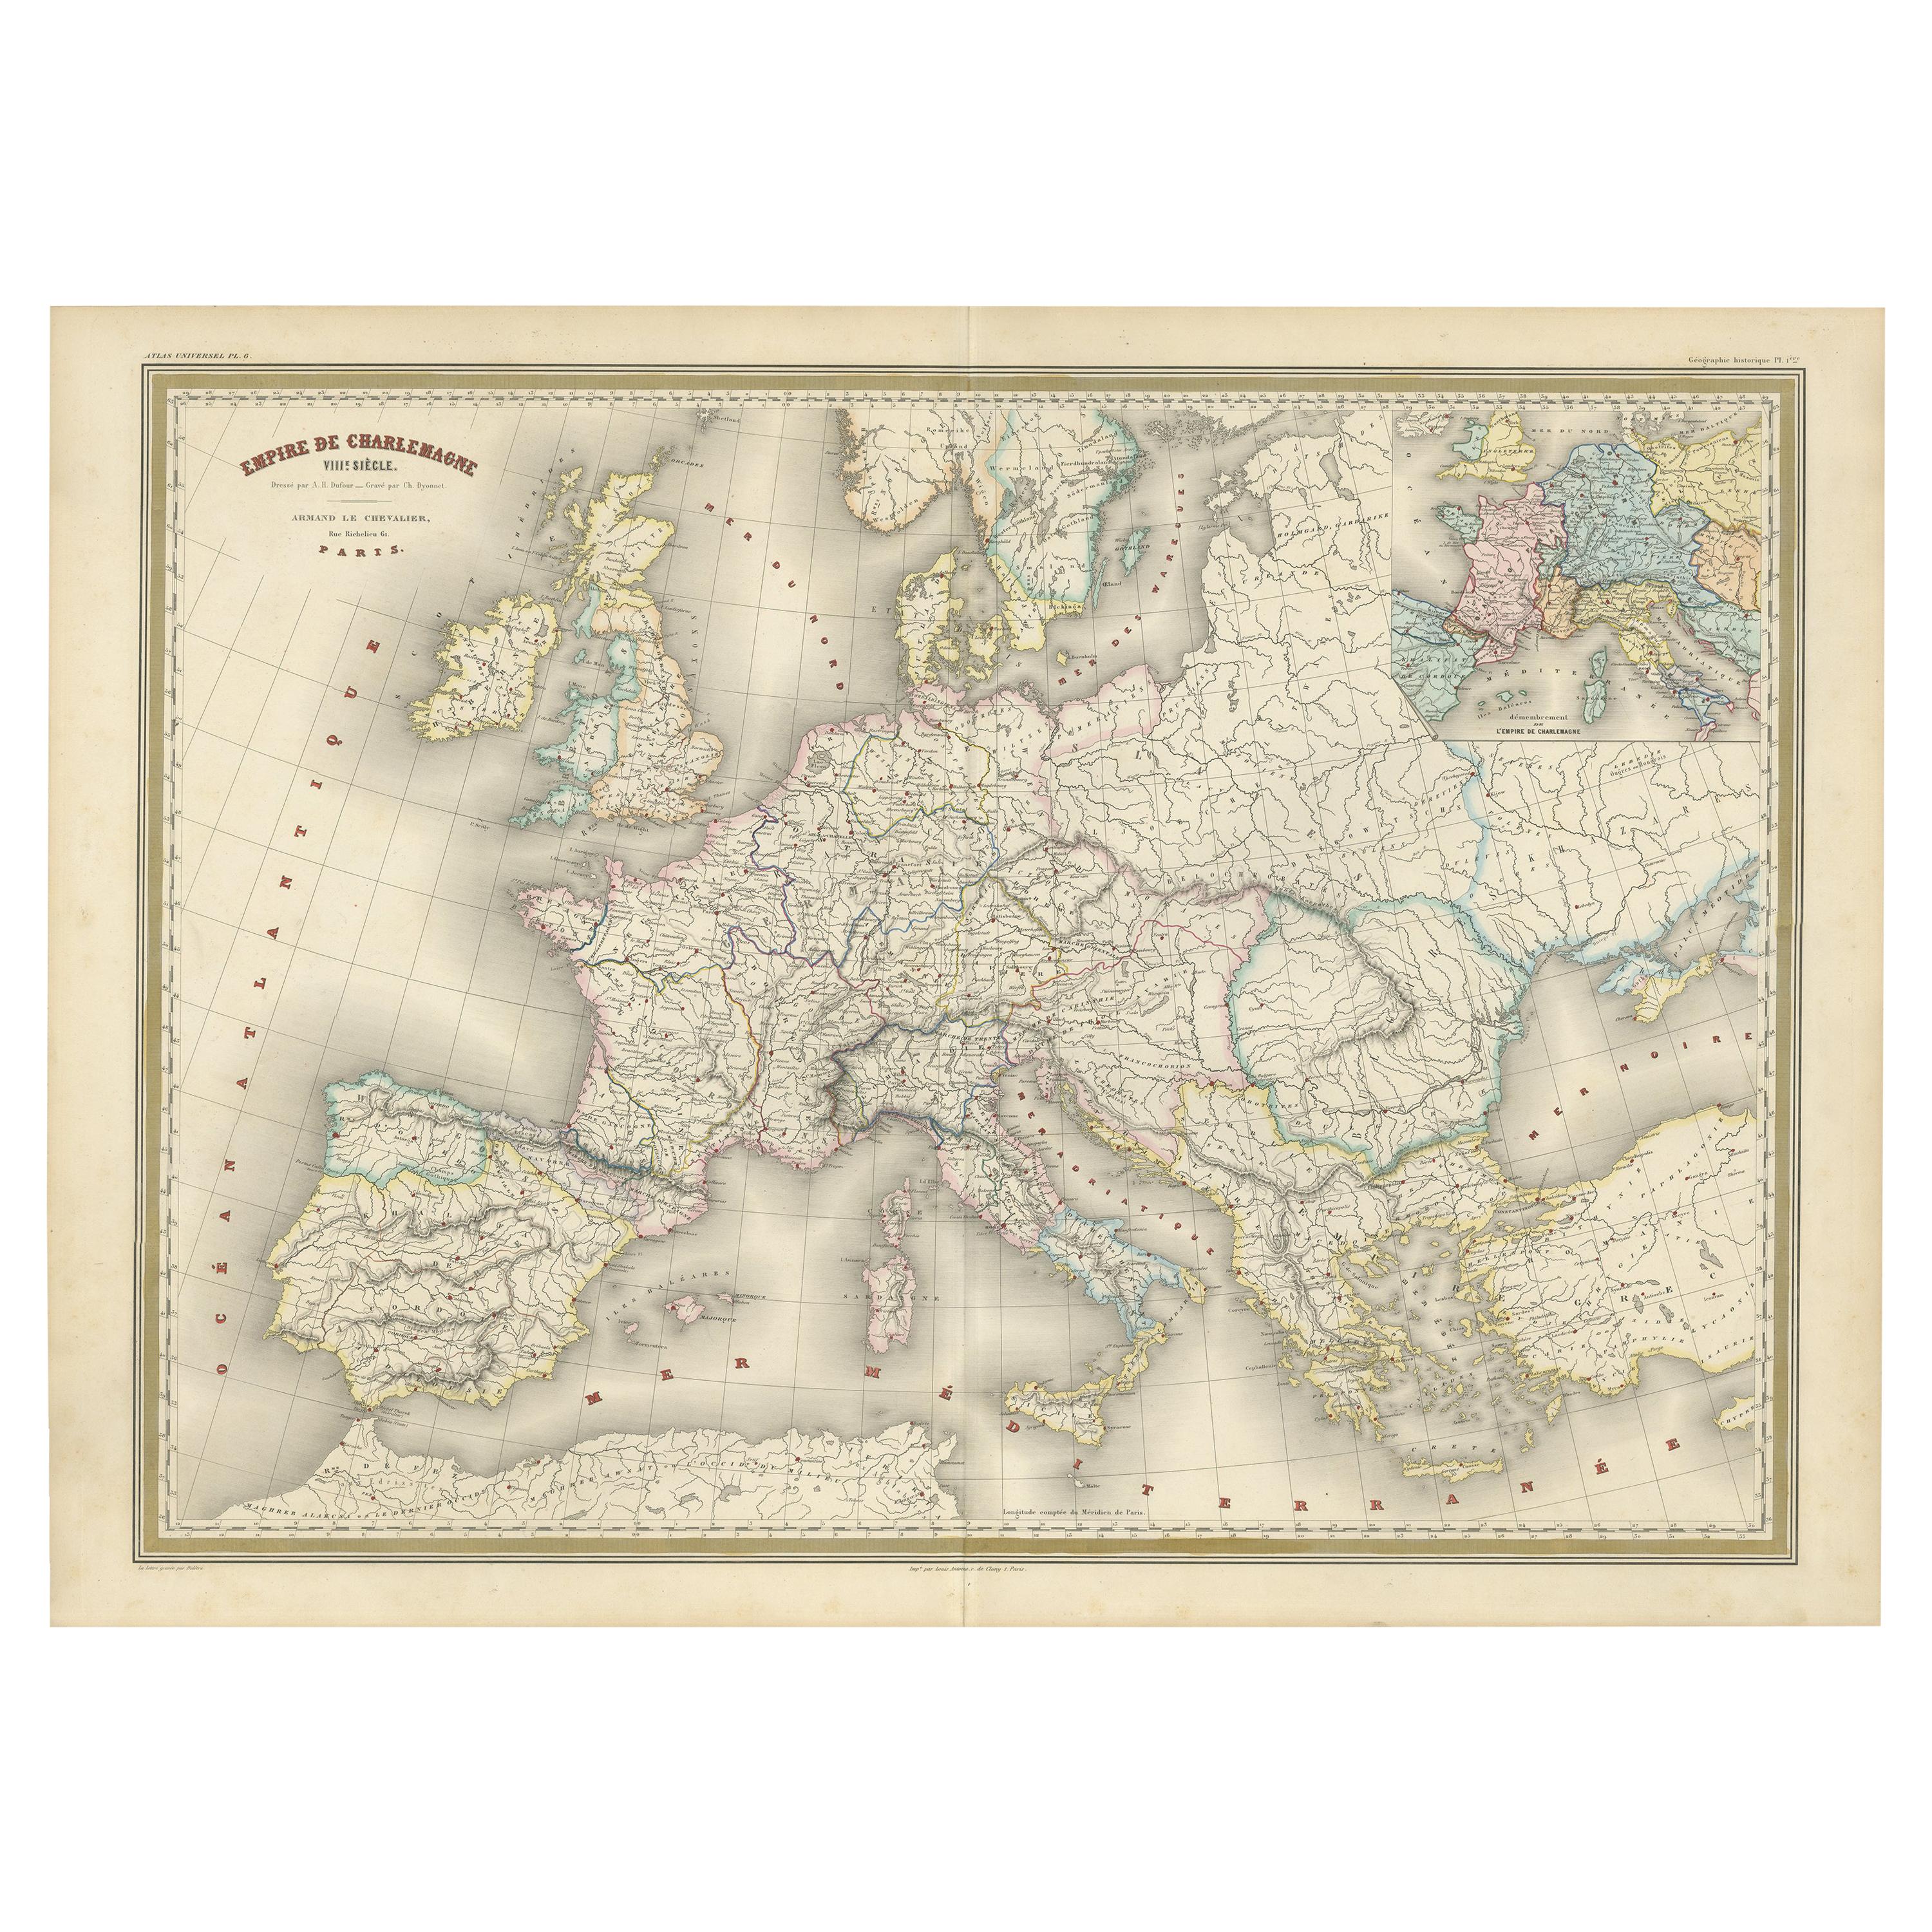 Antique Map of the Charlemagne Empire 'c.1860'